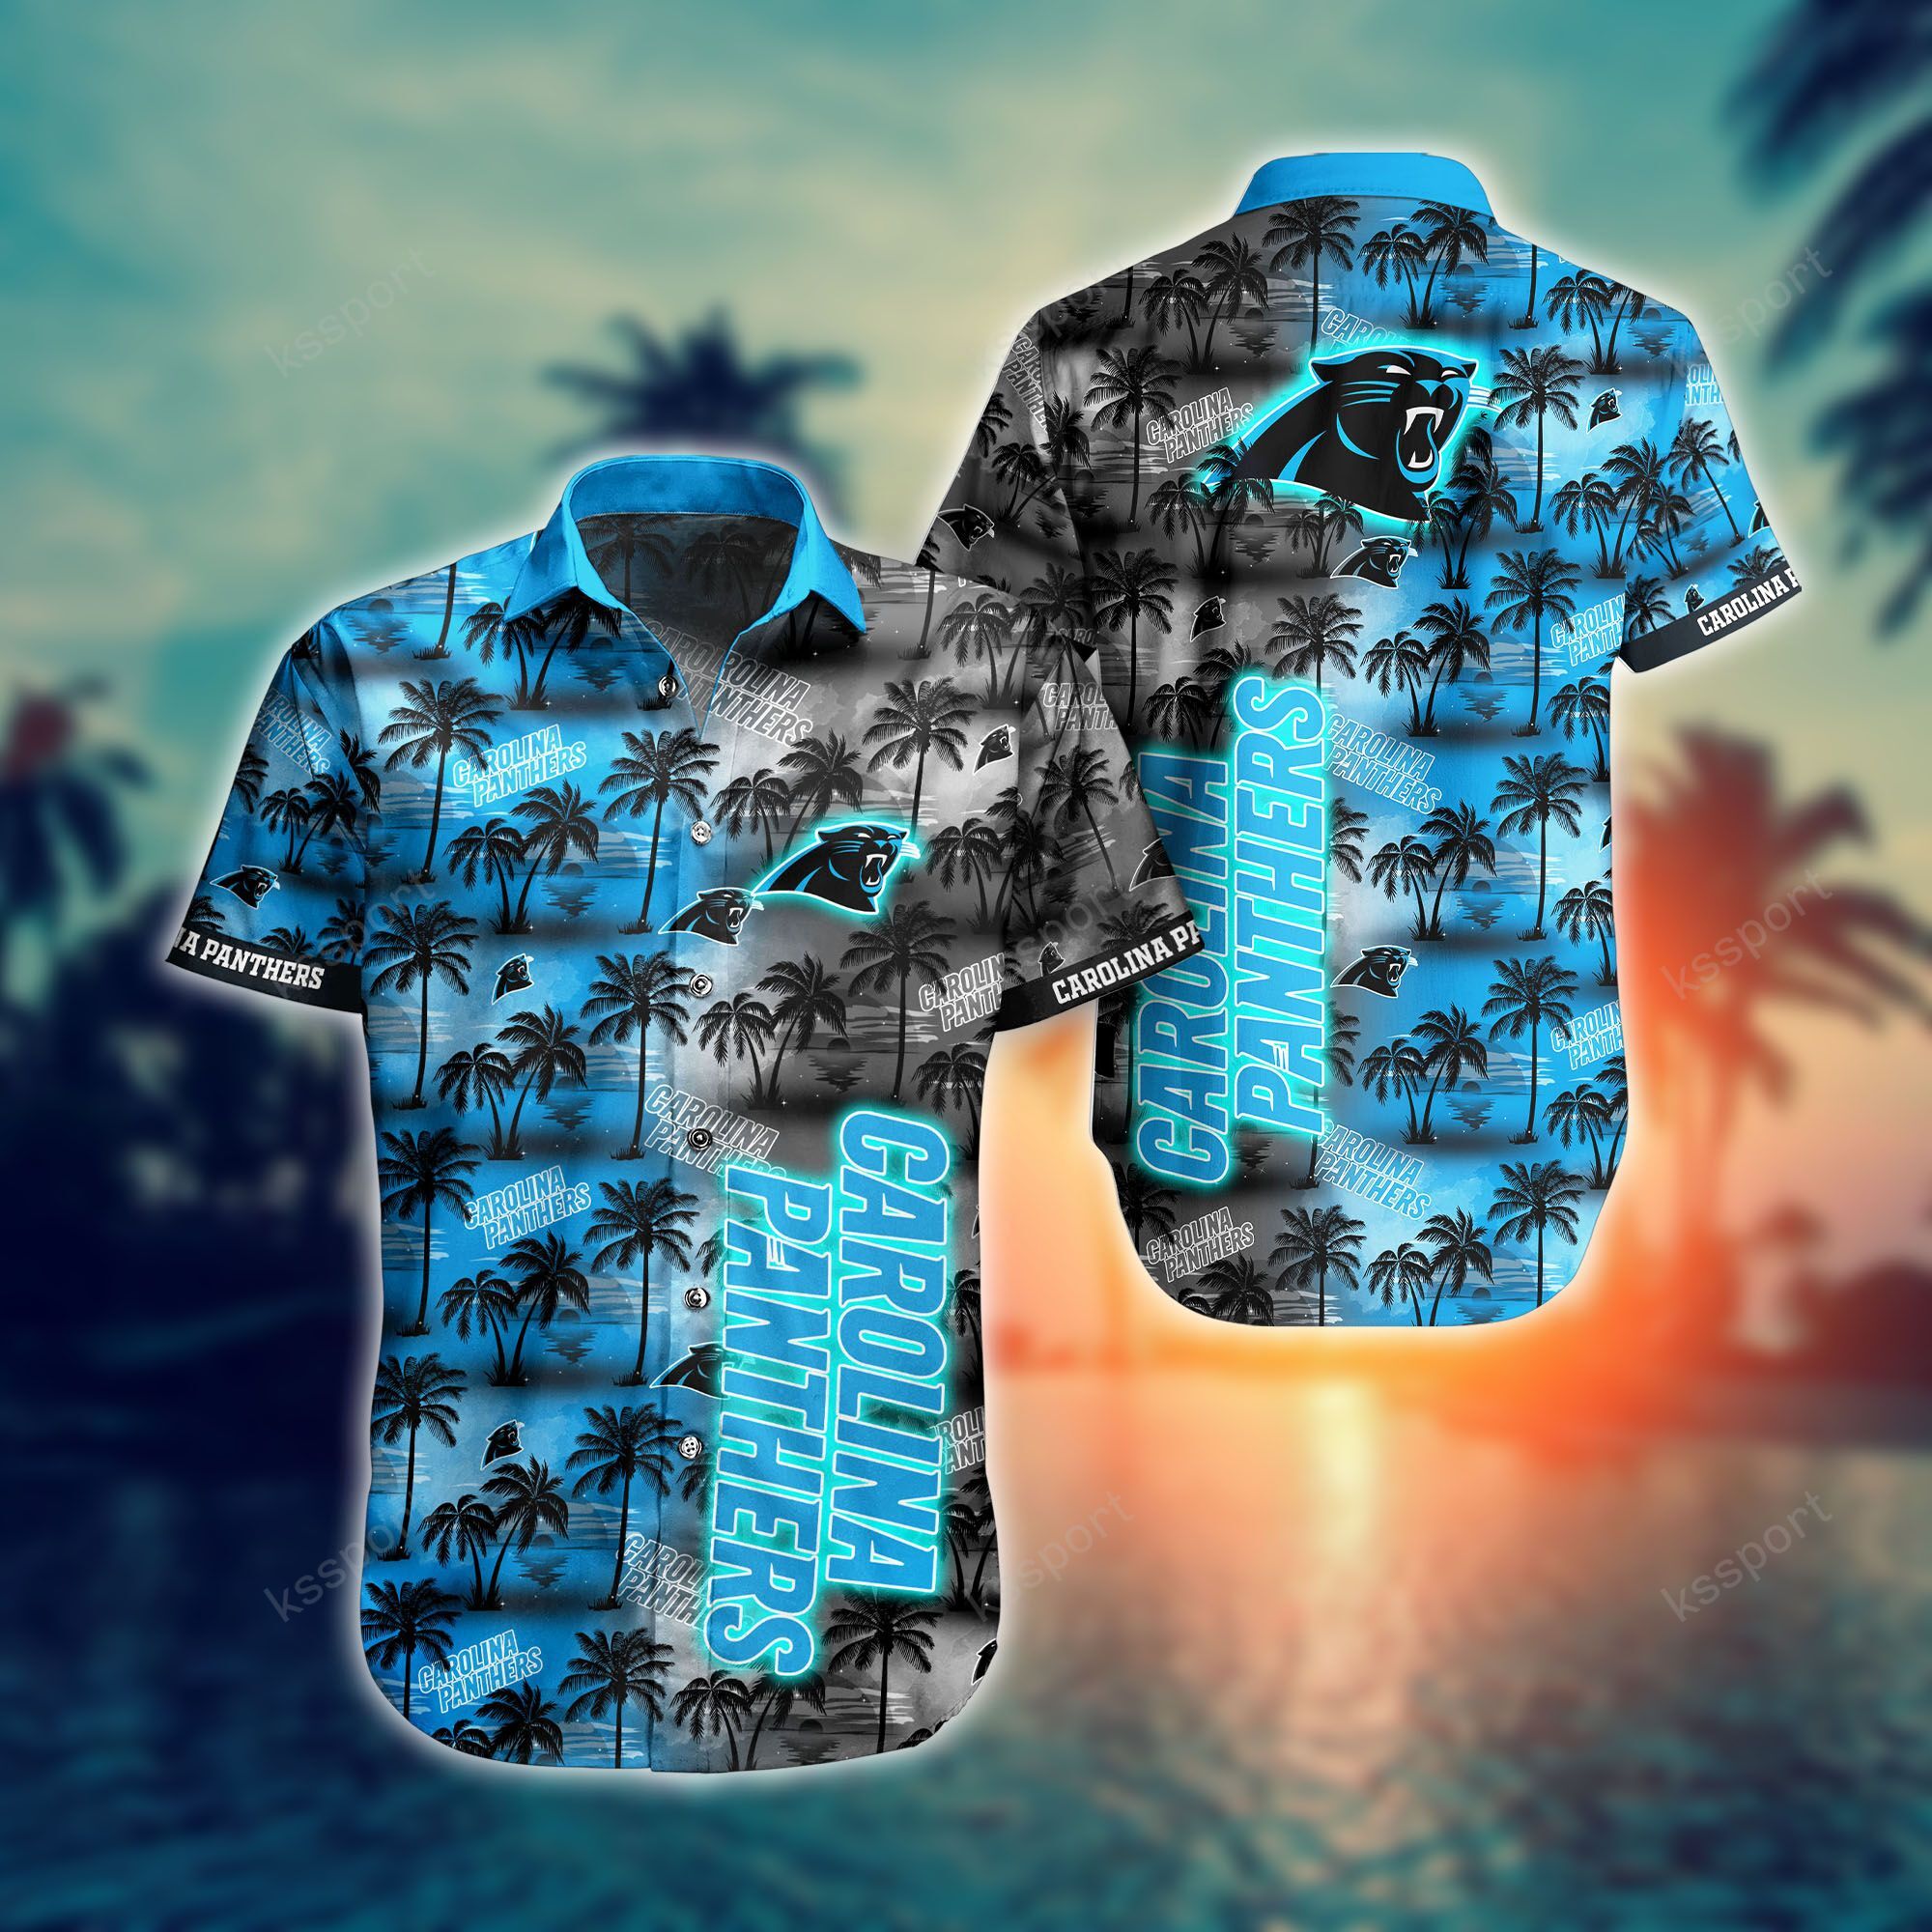 Treat yourself to a cool Hawaiian set today! 82